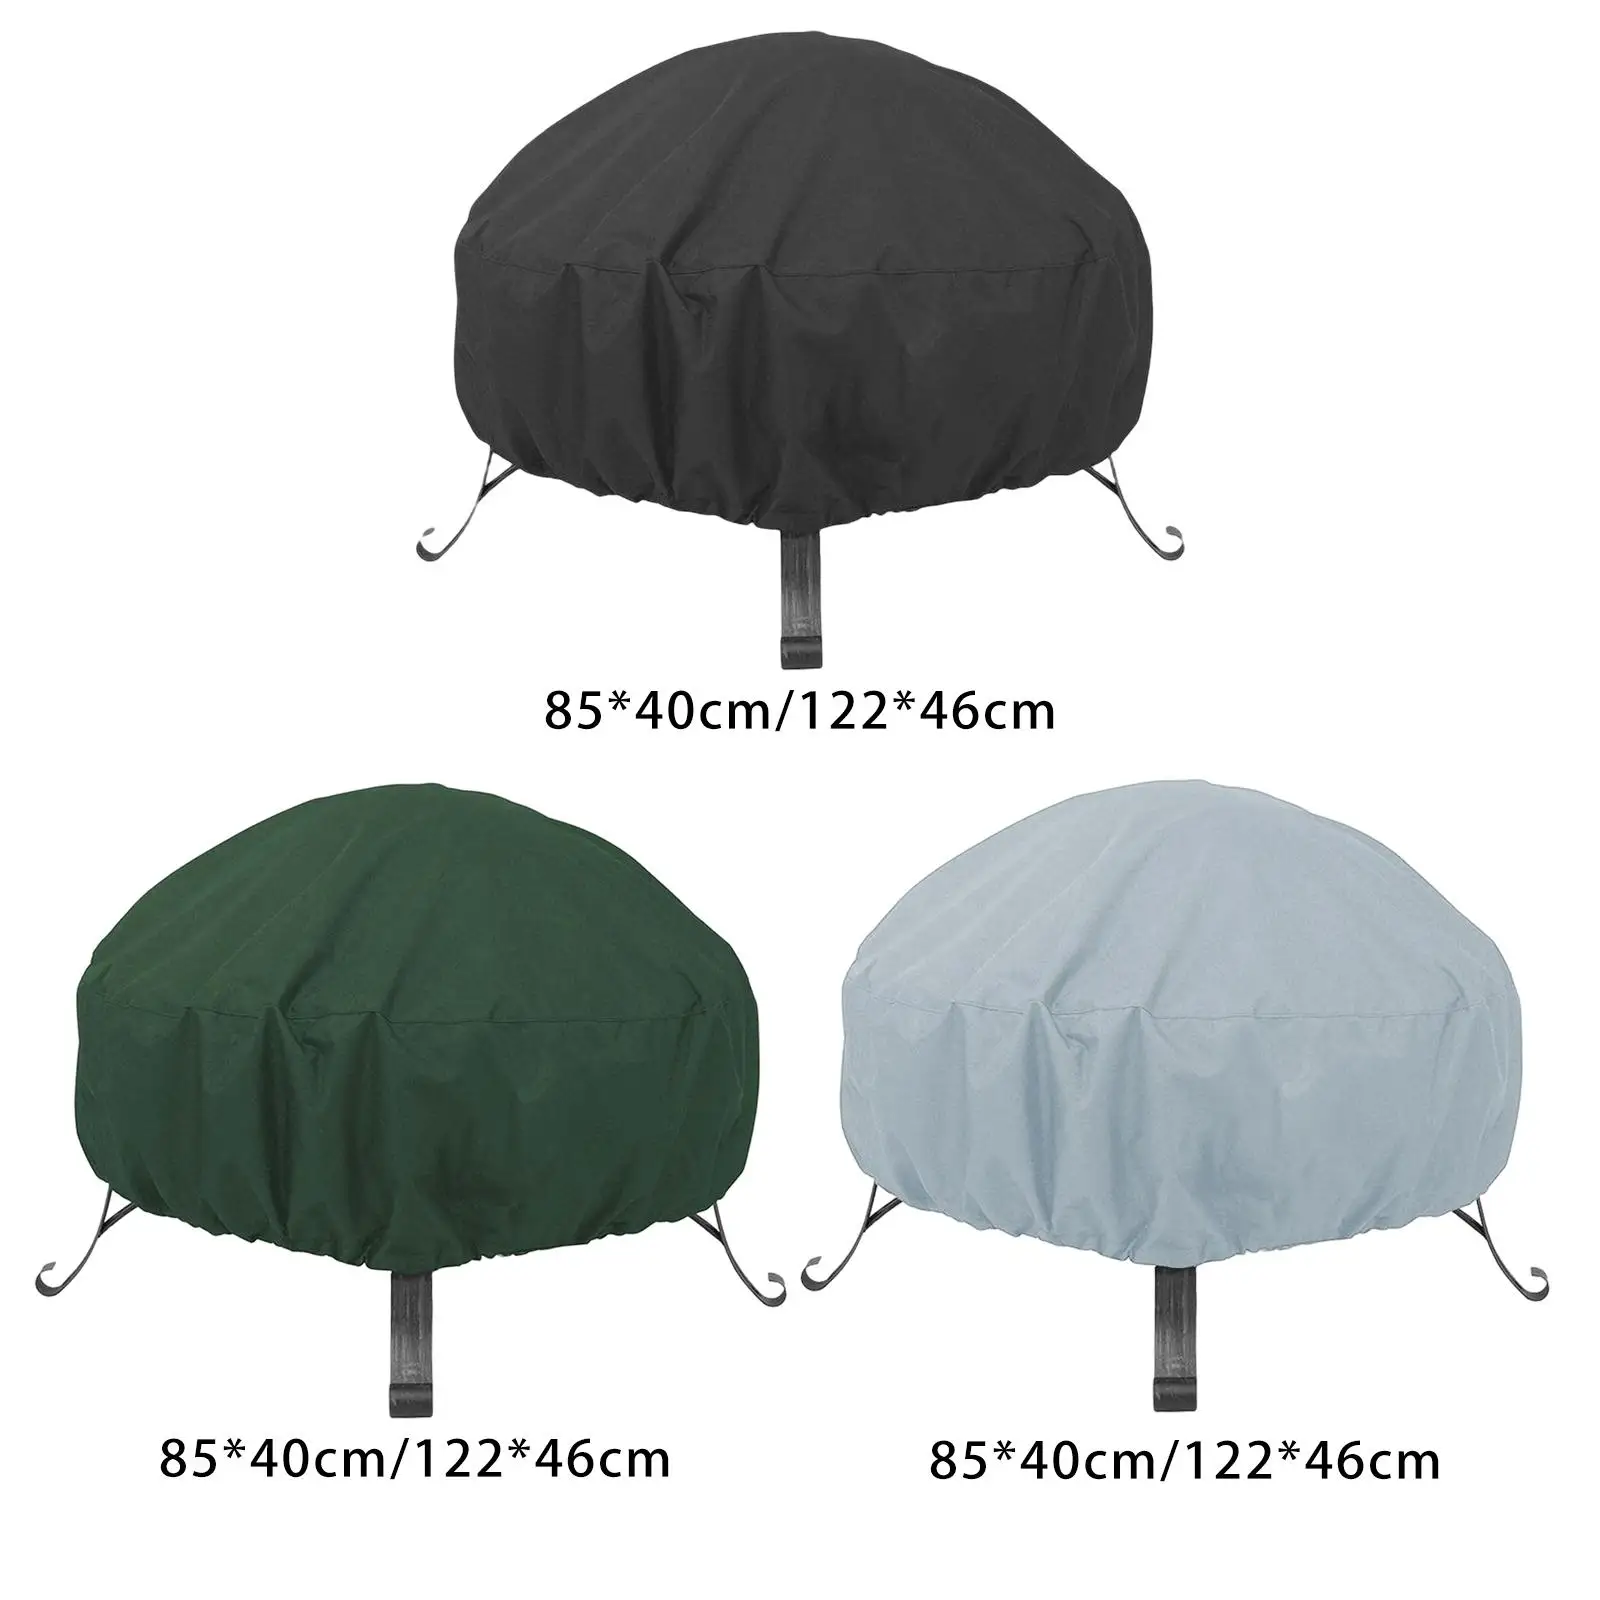 Portable Fire Pit Cover Windproof Outdoor Patio Firepit Sun Protect Durable Brazier Cover for Outdoor Indoor Barbecue Patio